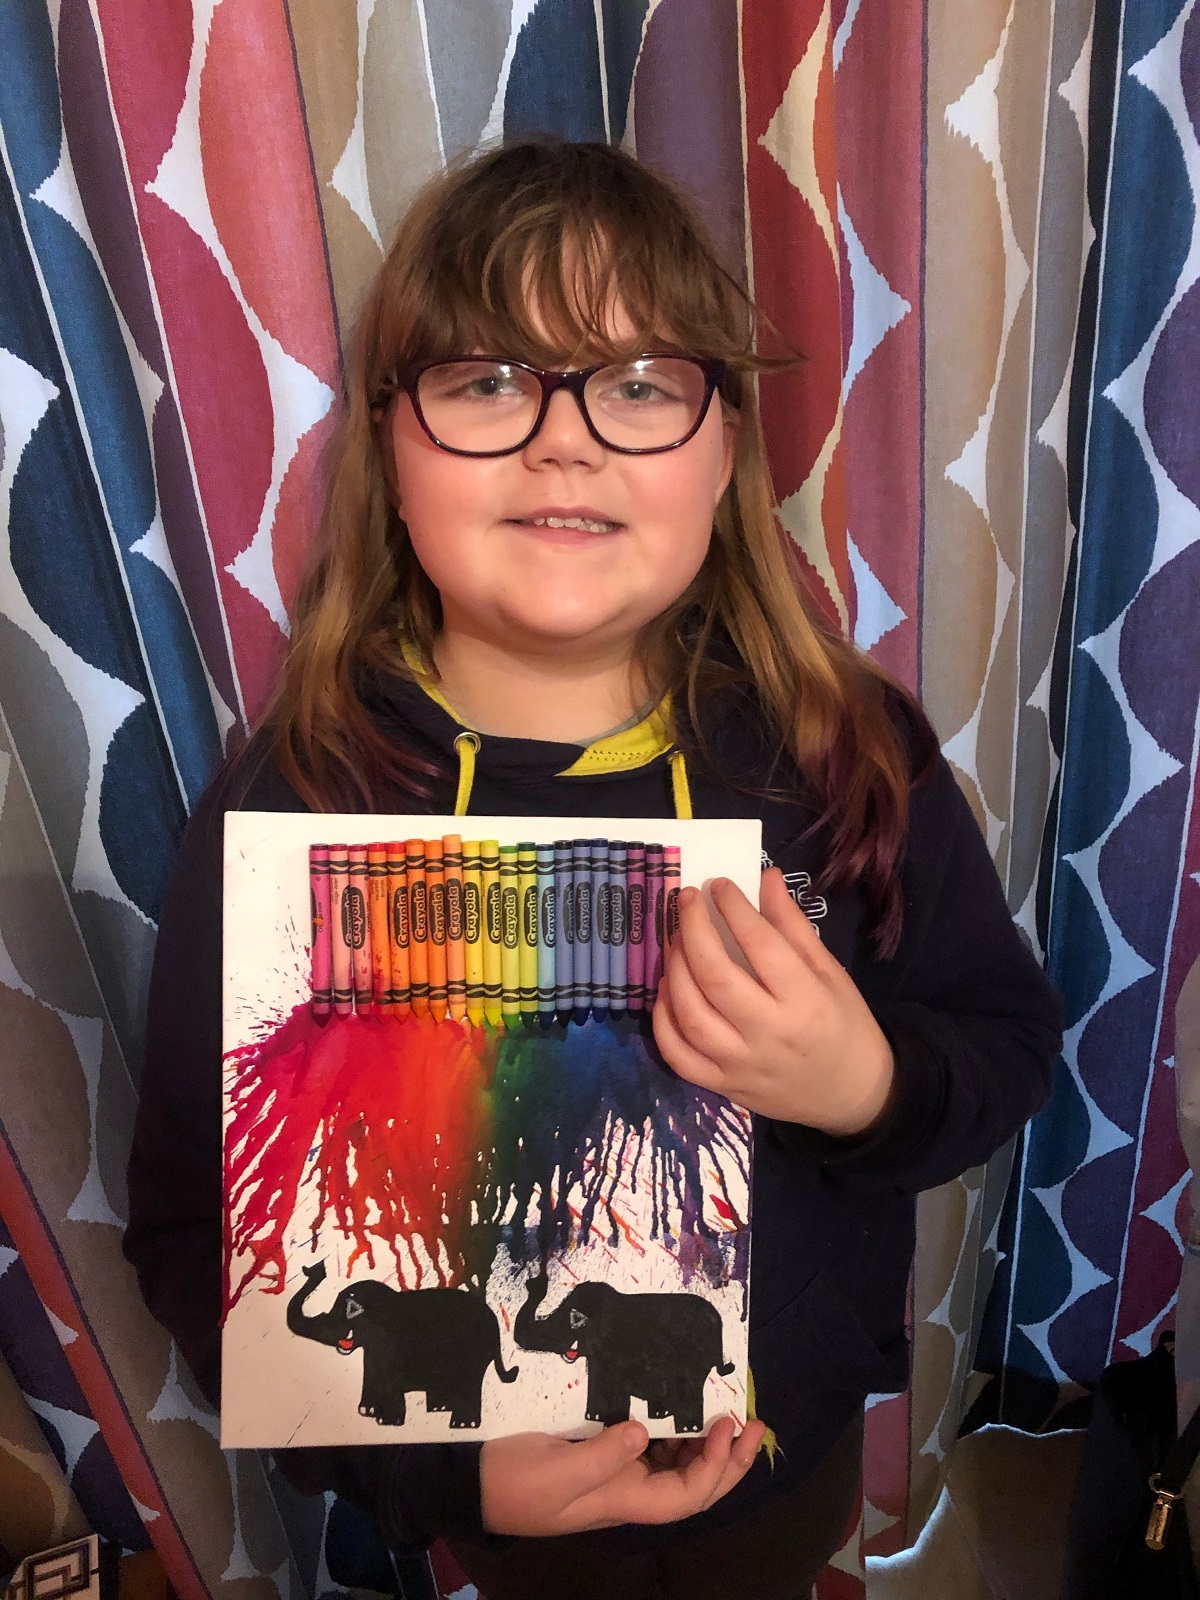 Vibrant - Maisy Williams, eight, produced this brilliant elephant picture